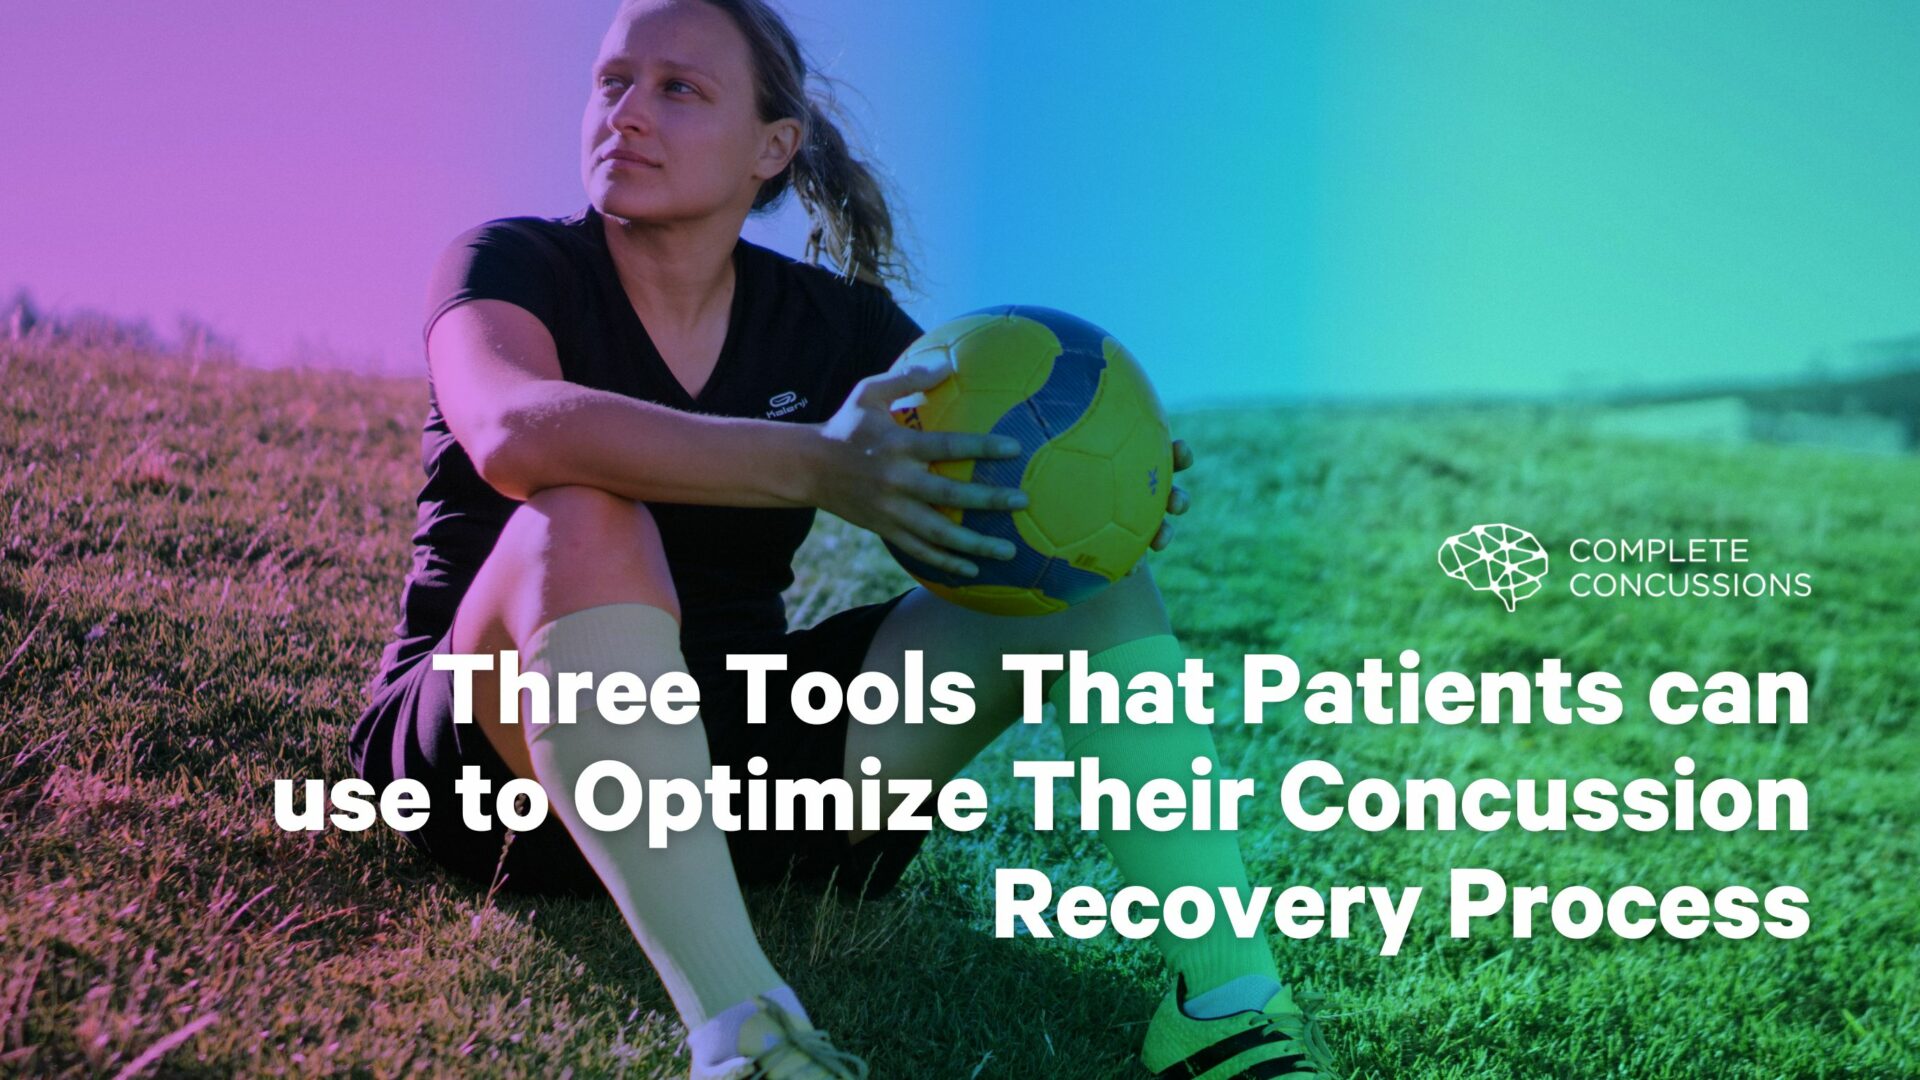 Three Tools That Patients can use to Optimize Their Concussion Recovery Process